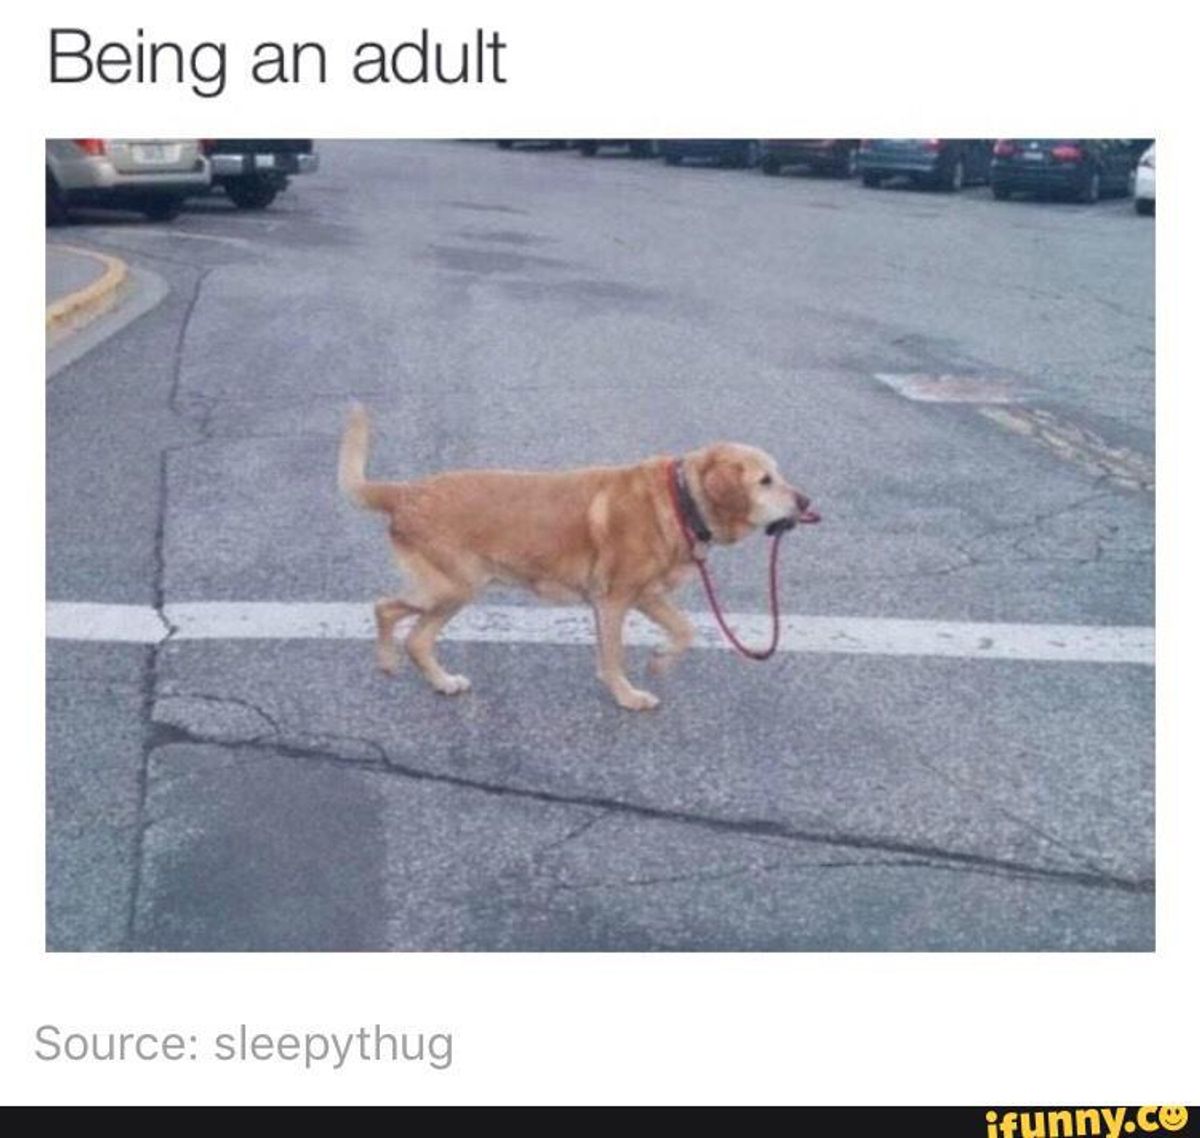 8 Things That Are Considered "Adulting"